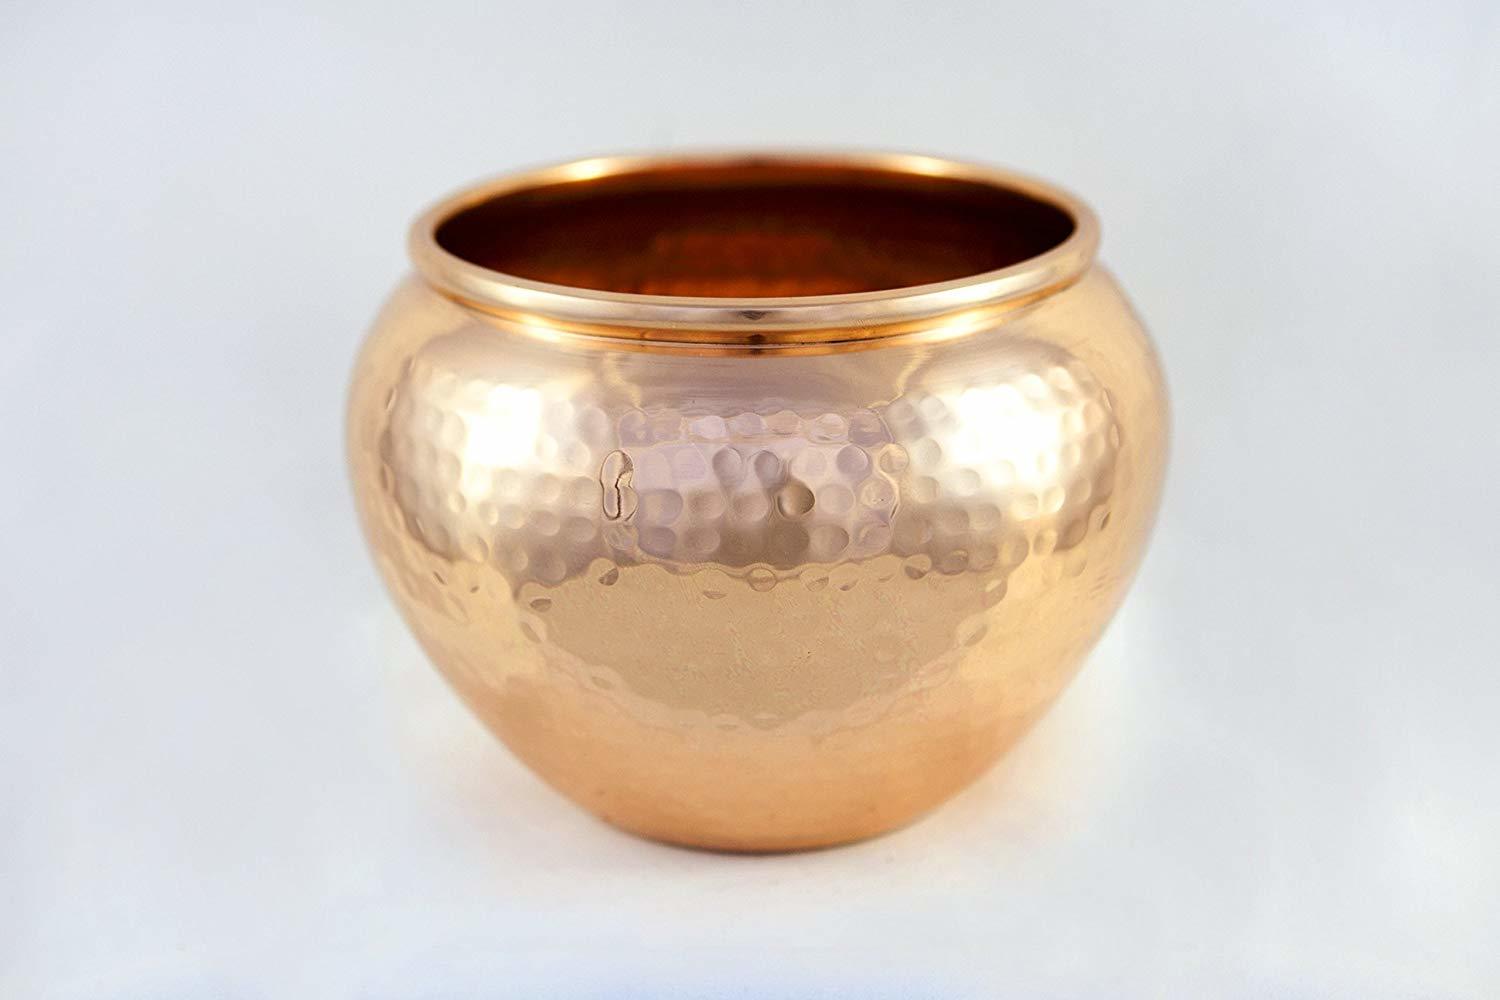 Hammered Solid Copper Small Vase Planter